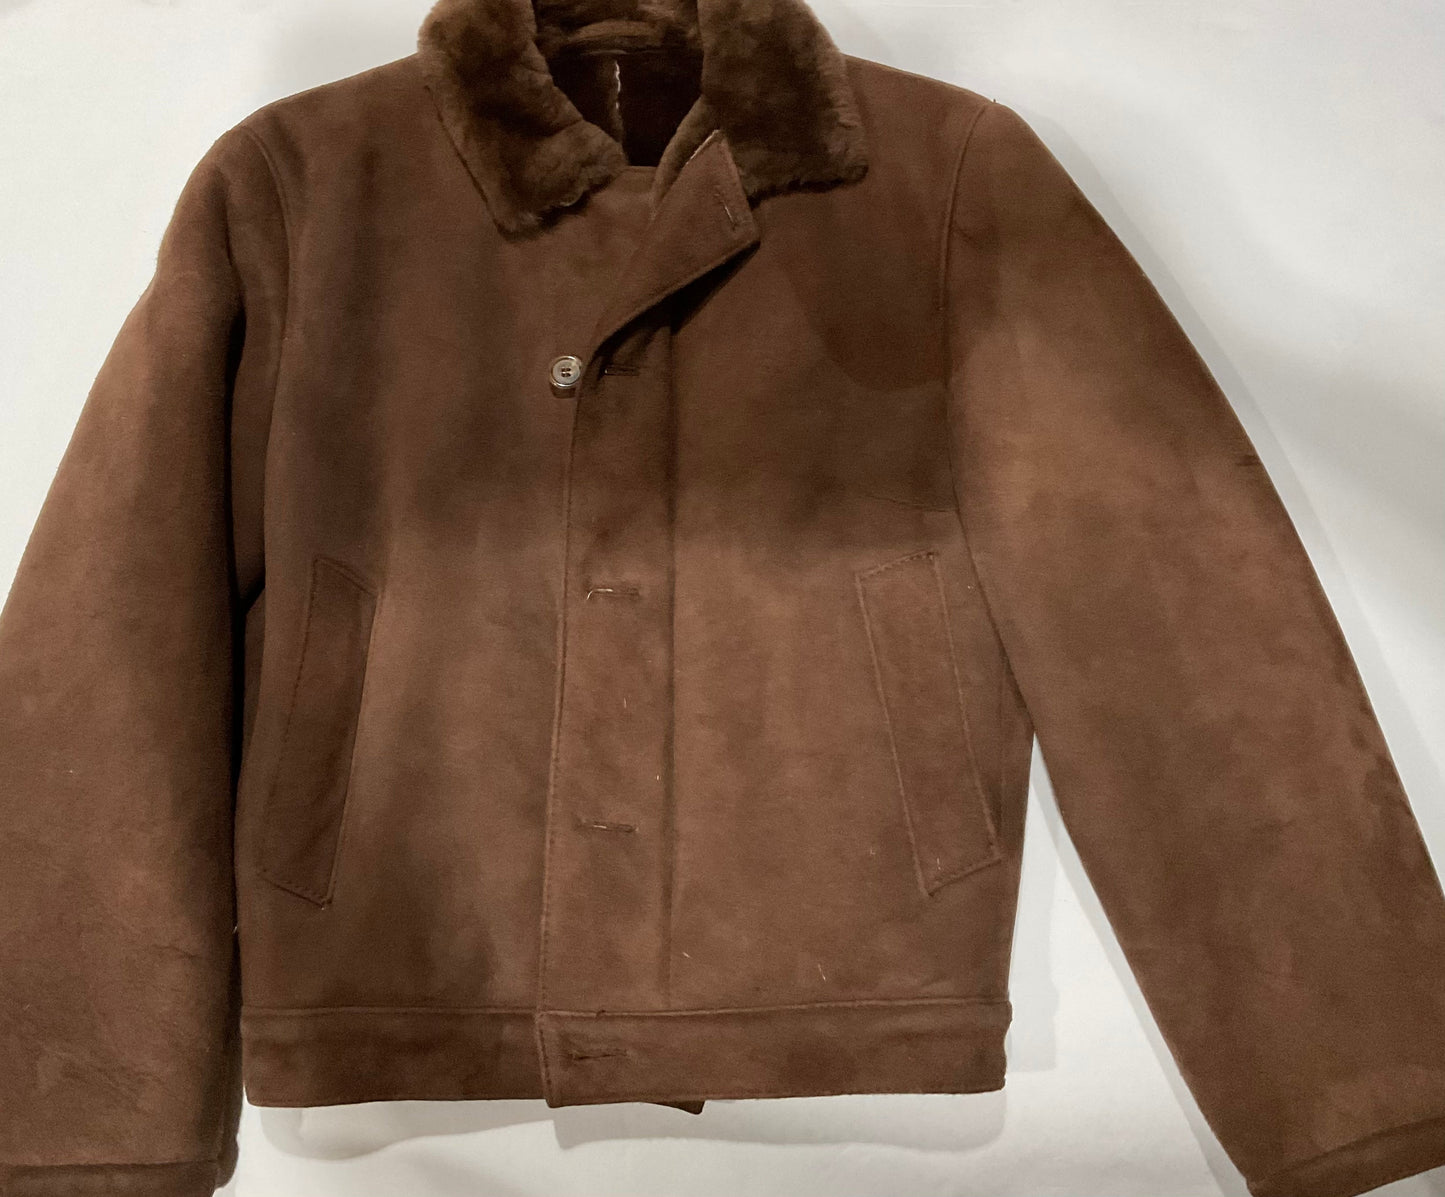 SHEARLING JACKET / BROWN / SMALL / CRAFTED IN USA